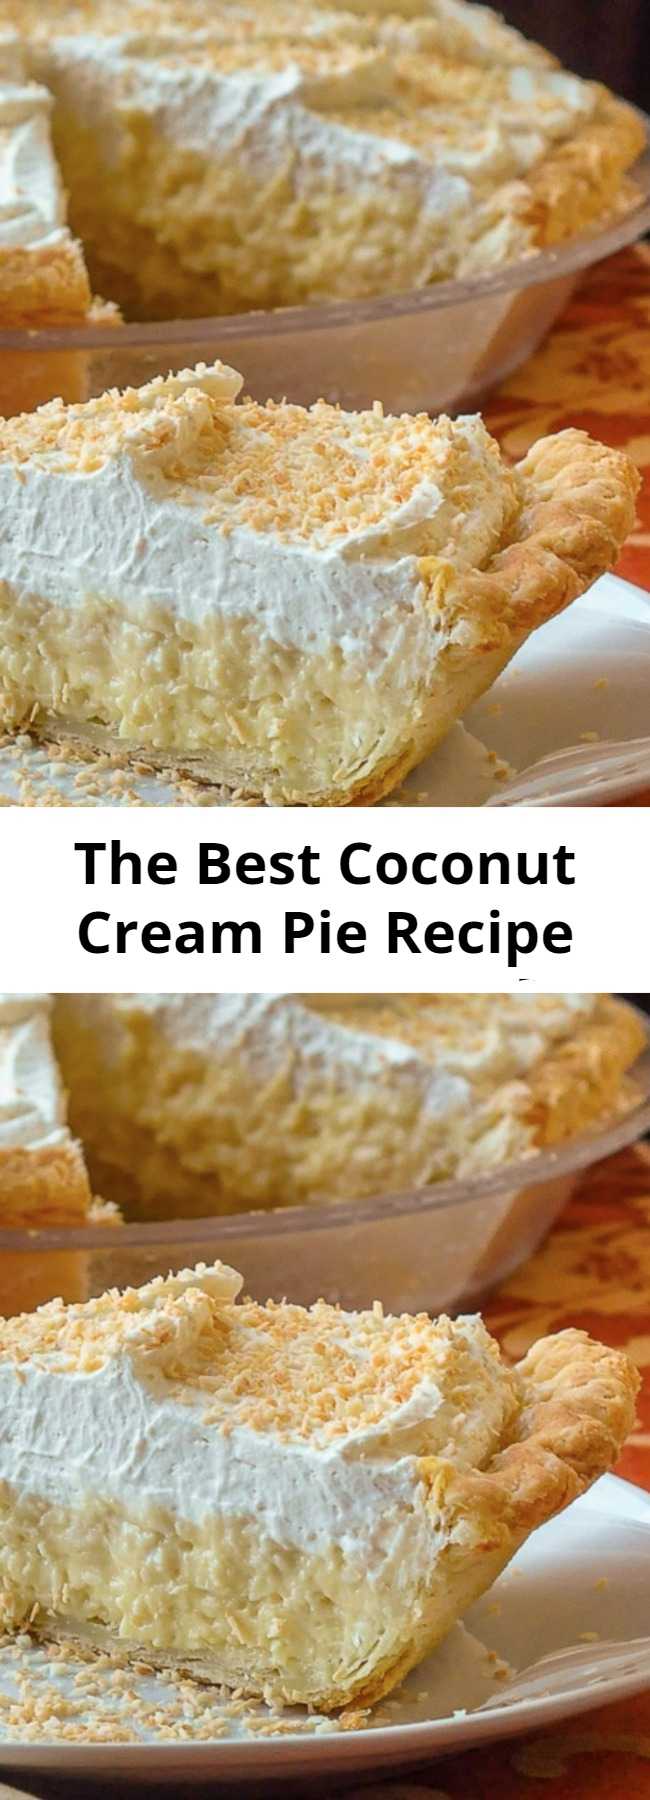 The Best Coconut Cream Pie Recipe - The Absolute Best Coconut Cream Pie. Truly the absolute best! A creamy, old-fashioned coconut cream pie recipe that this avid baker has used for over 30 years. I have never tasted a better recipe.